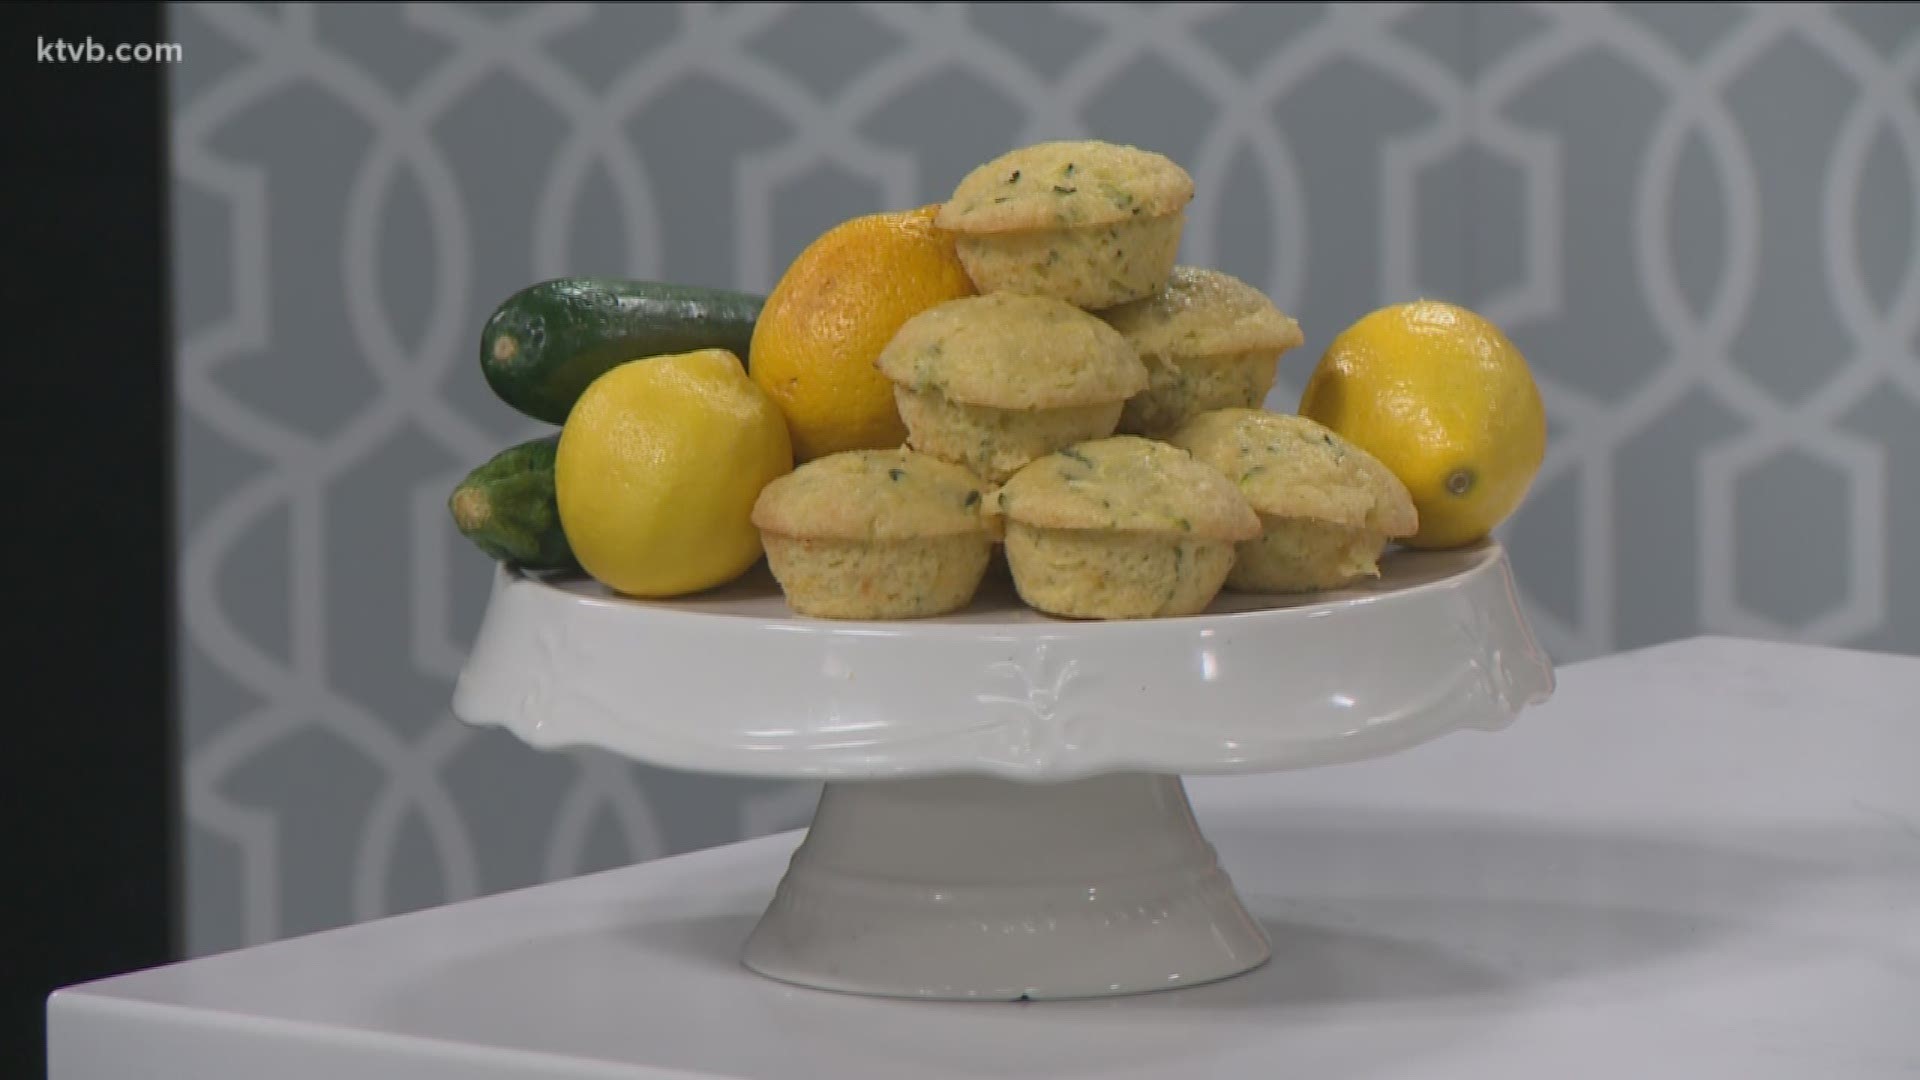 Pohley Richey from the Boise Urban Garden School shows how to bake lemon zucchini muffins.